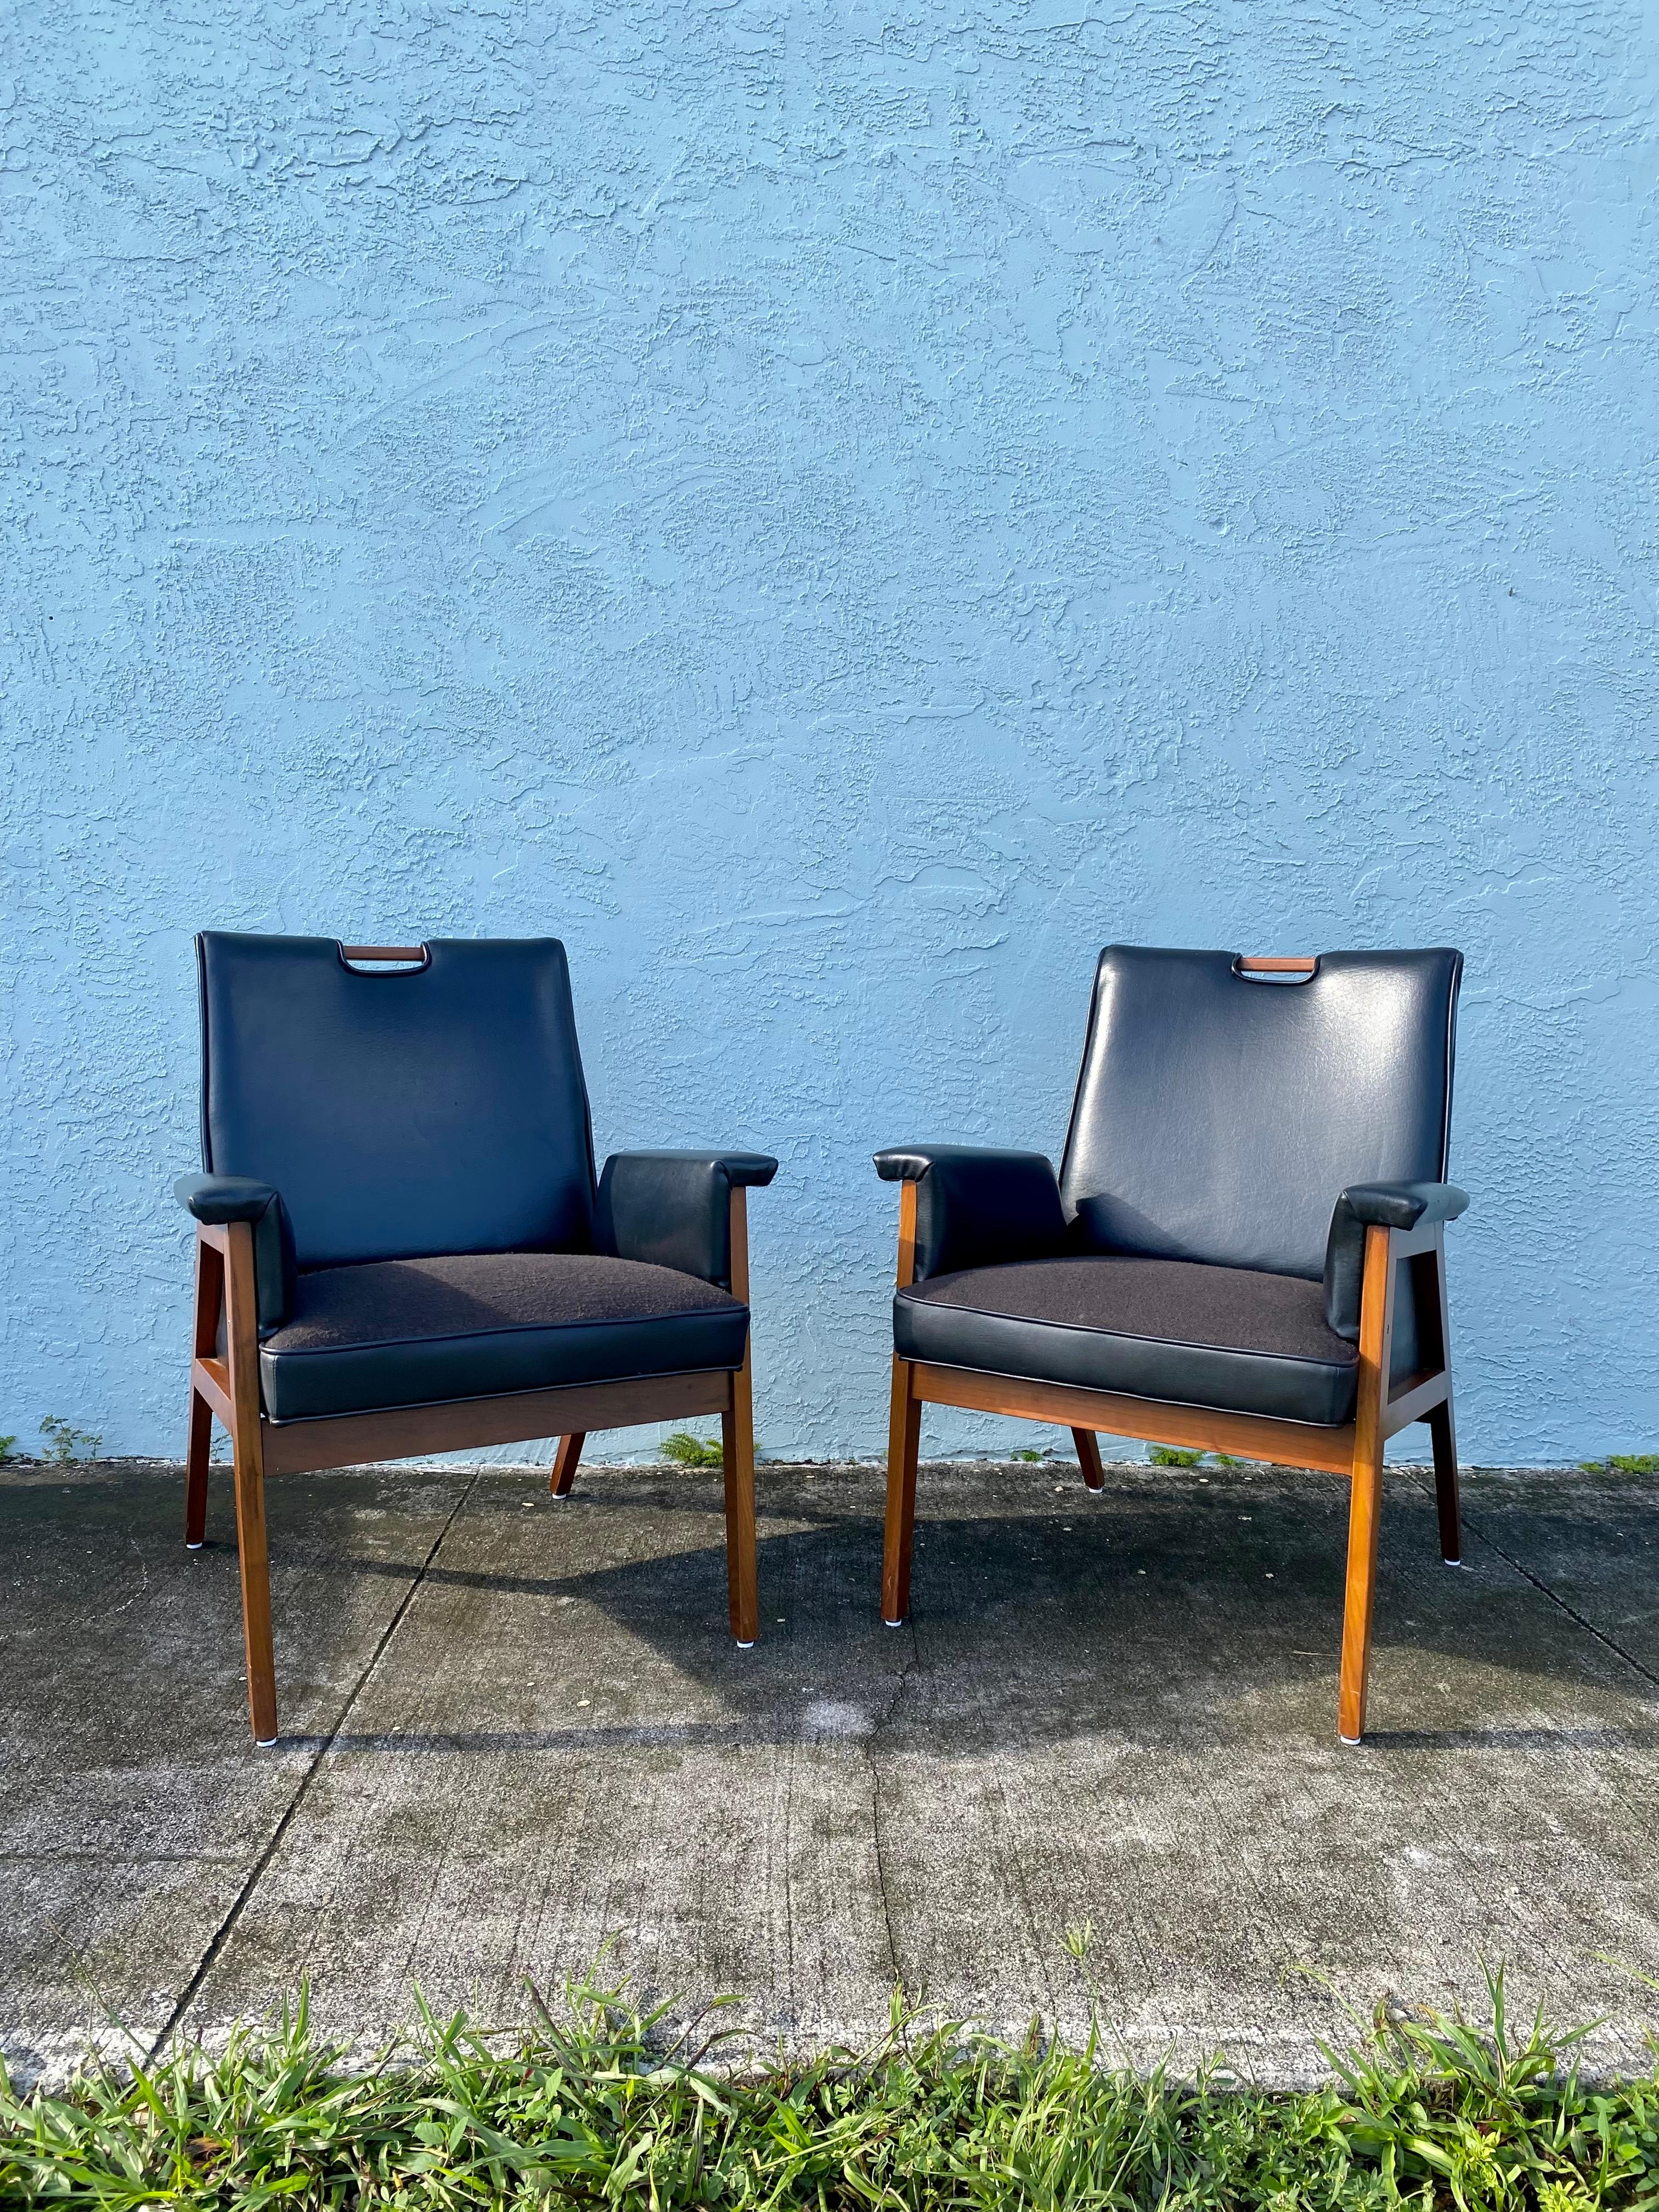 1960s Finn Julh Danish Walnut Leather Sculptural Chairs, Set of 2 For Sale 3